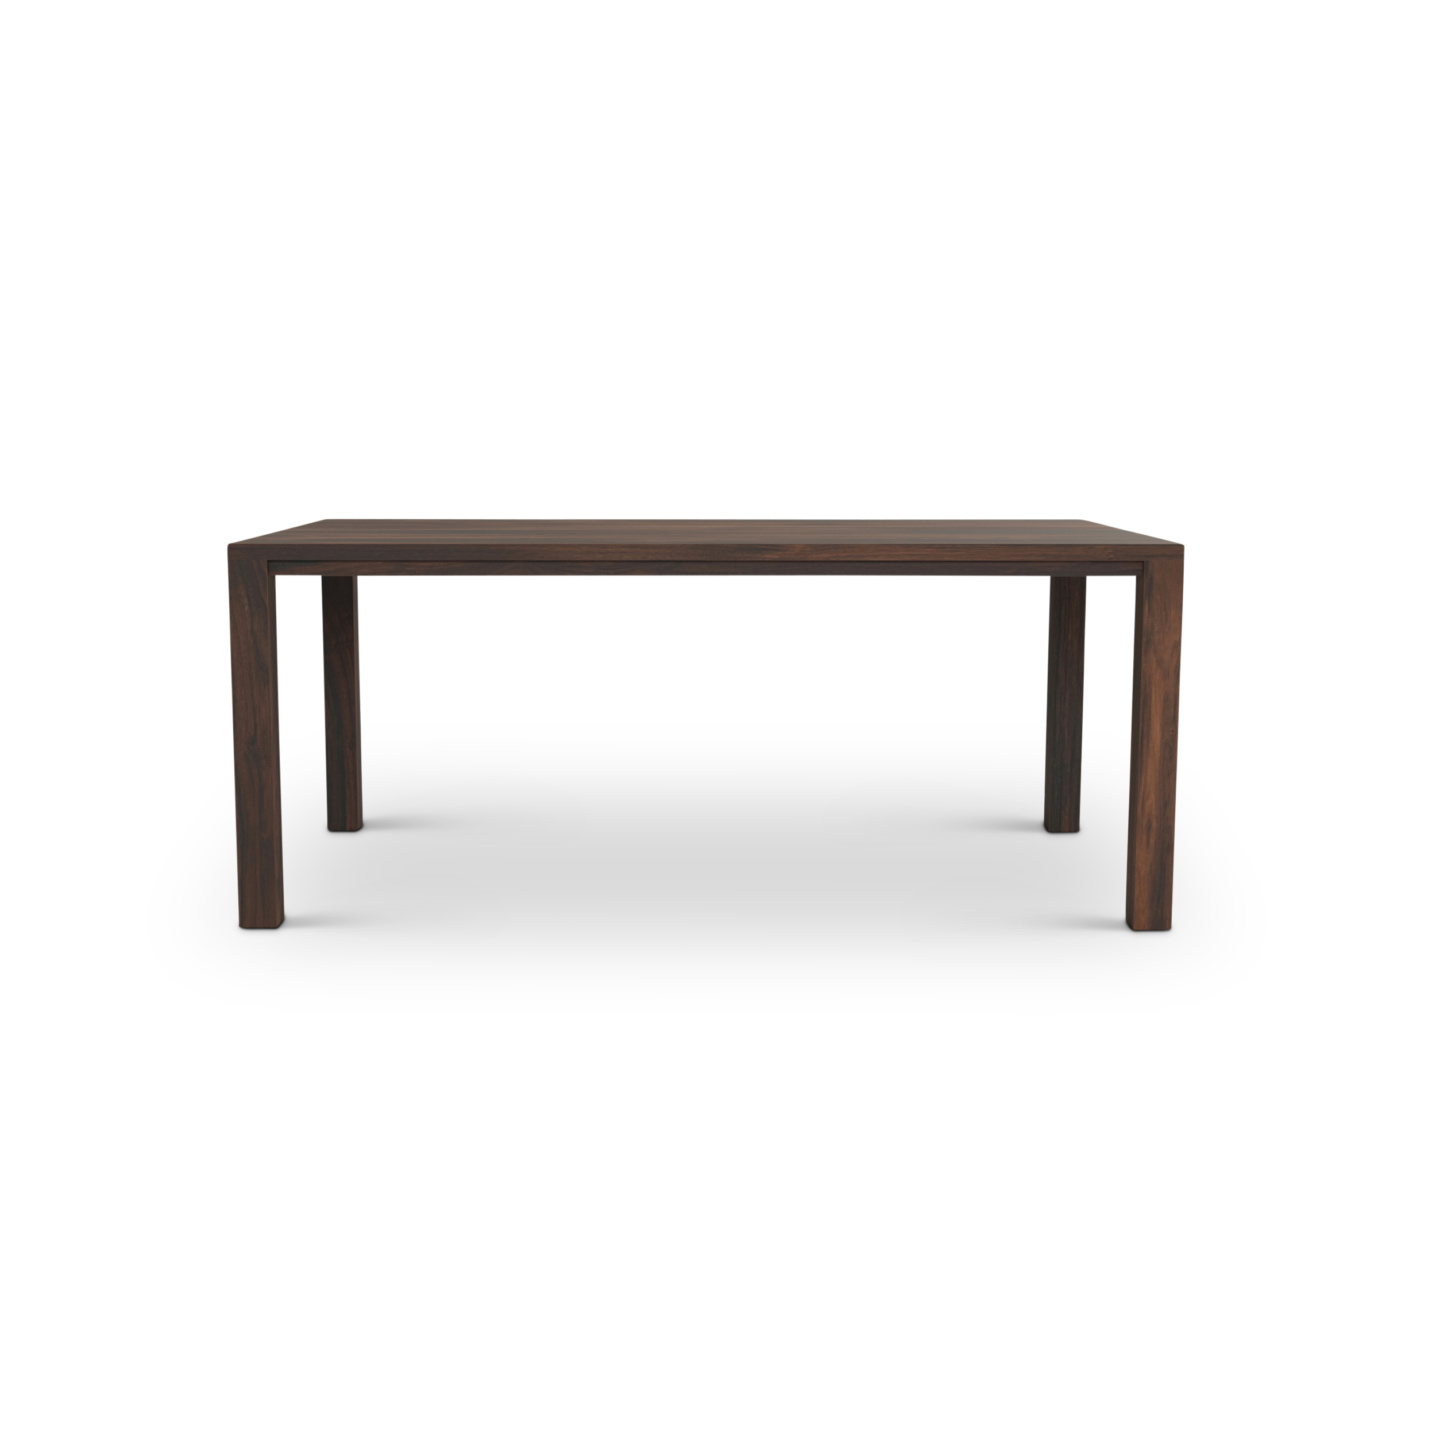 Modern walnut table with large square legs